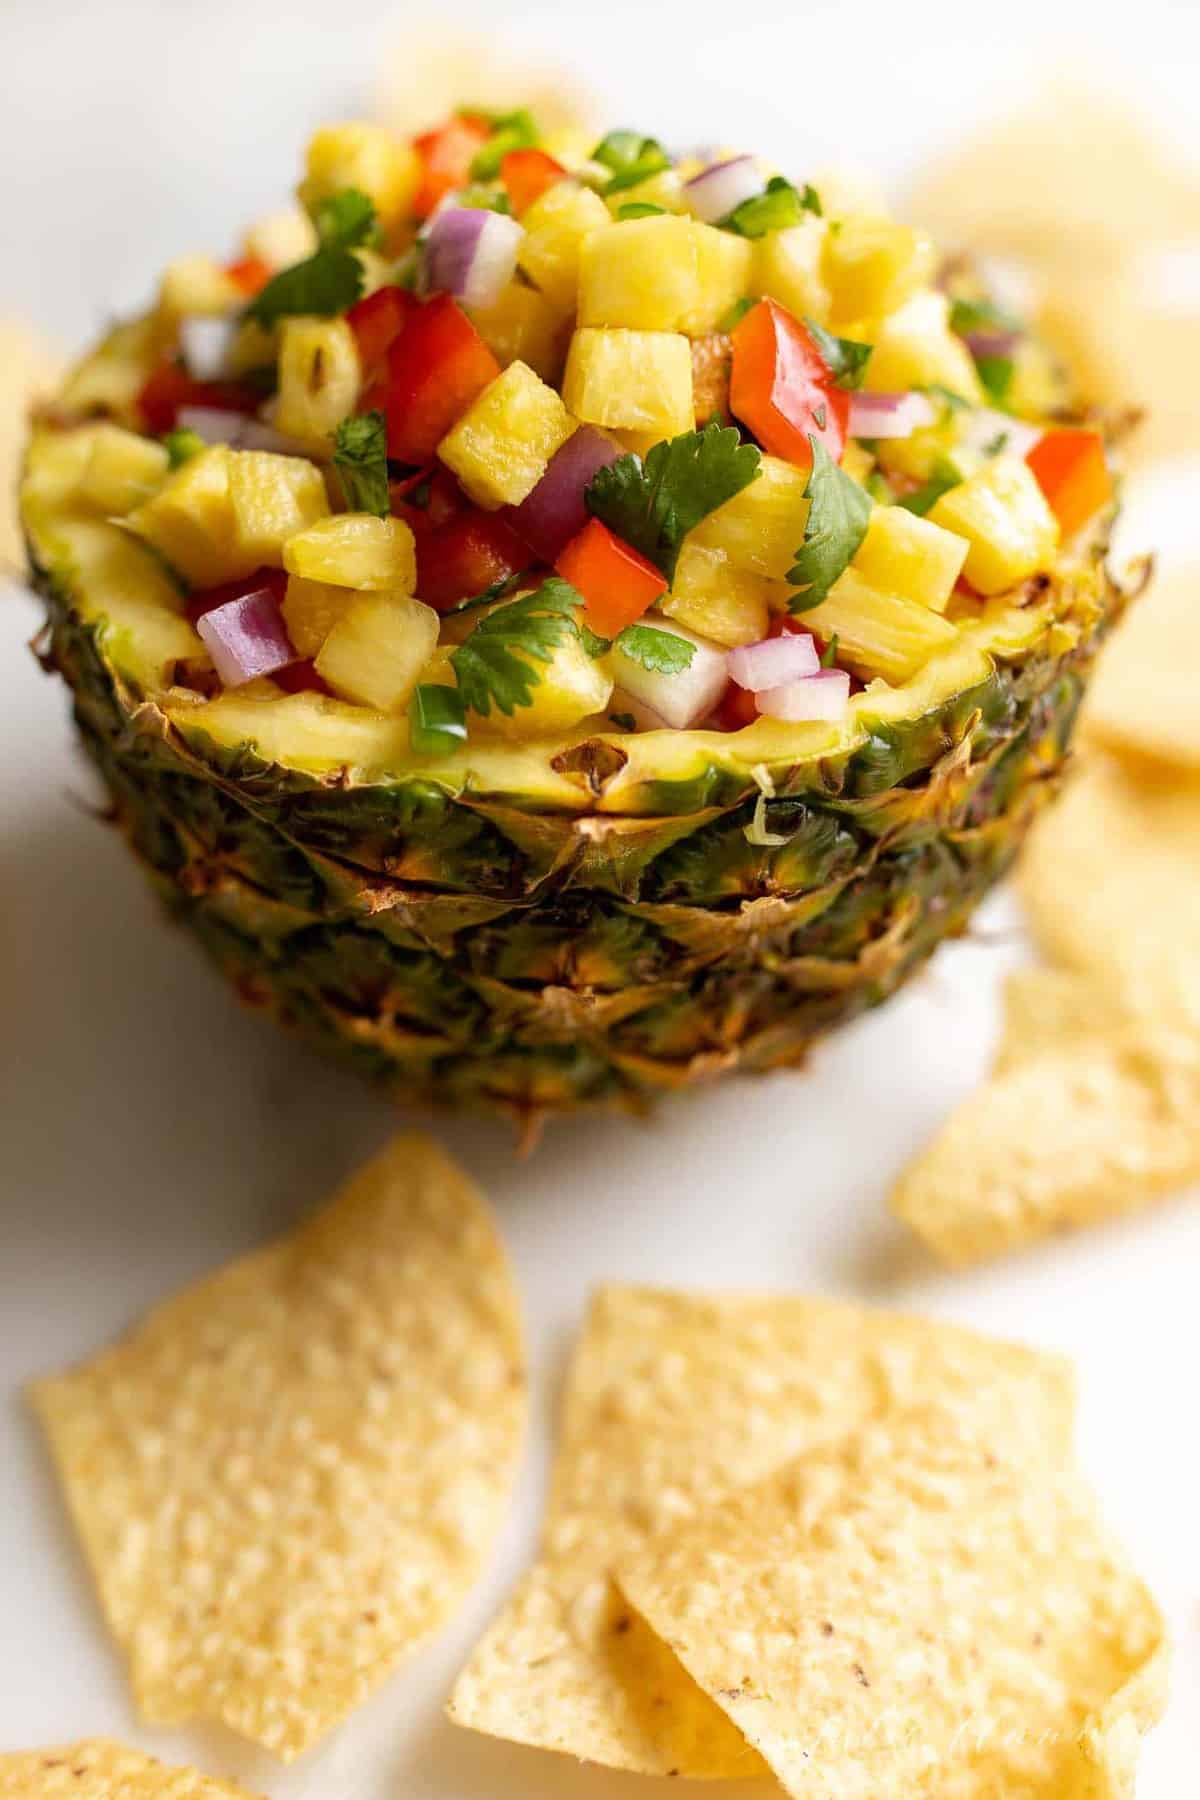 A fresh bowl made from a cut pineapple, filled with pineapple salsa, tortilla chips surrounding.